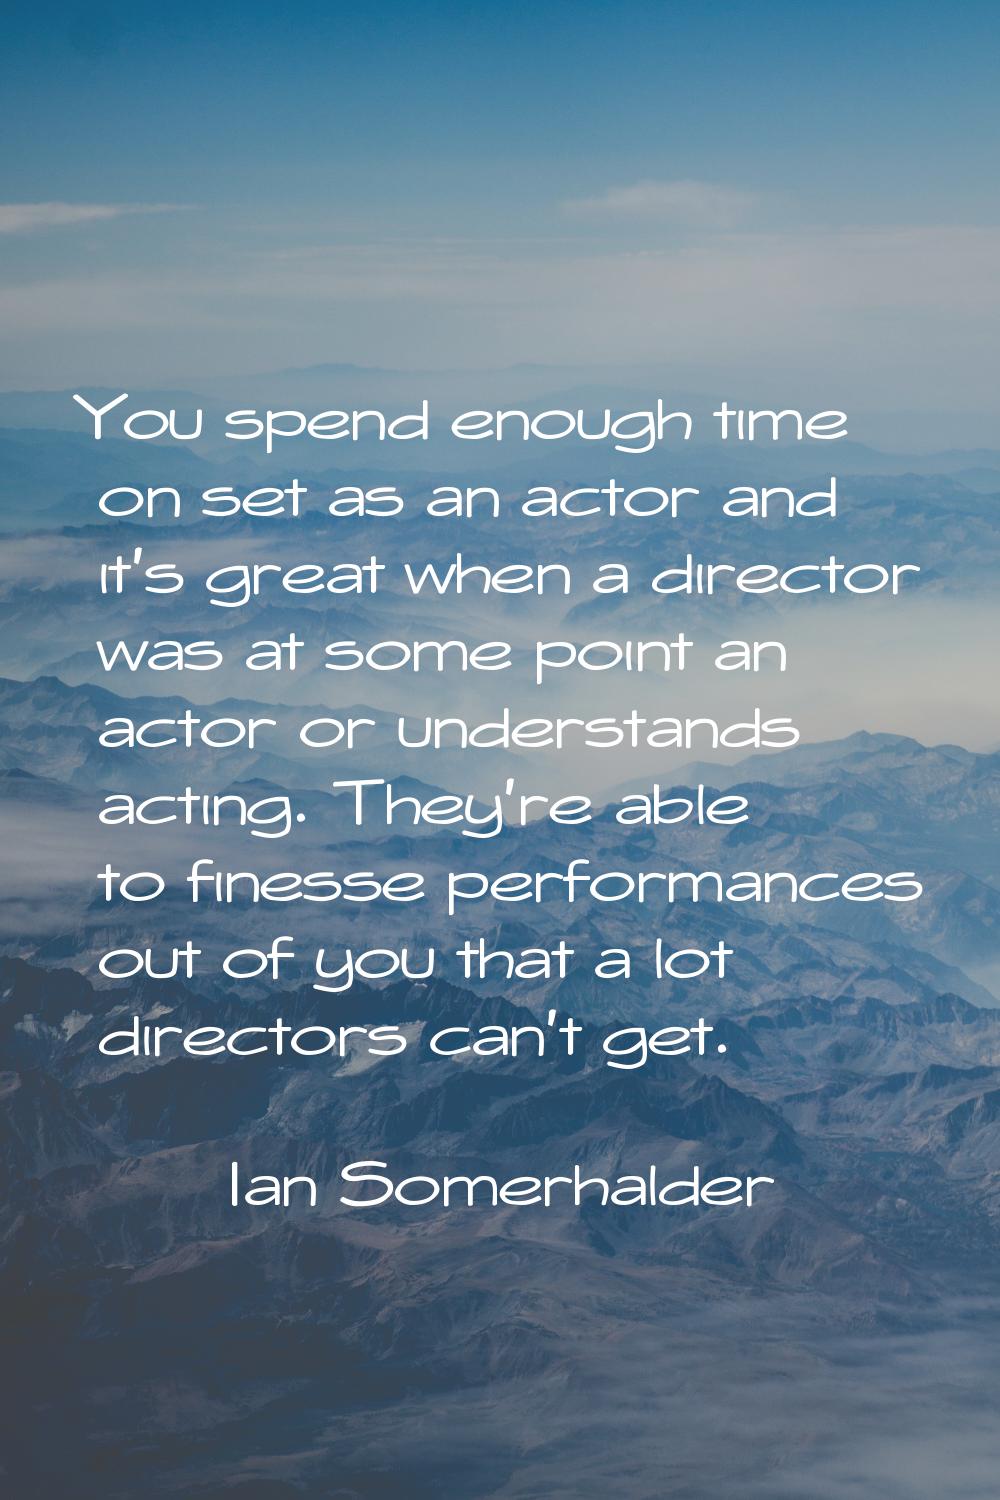 You spend enough time on set as an actor and it's great when a director was at some point an actor 